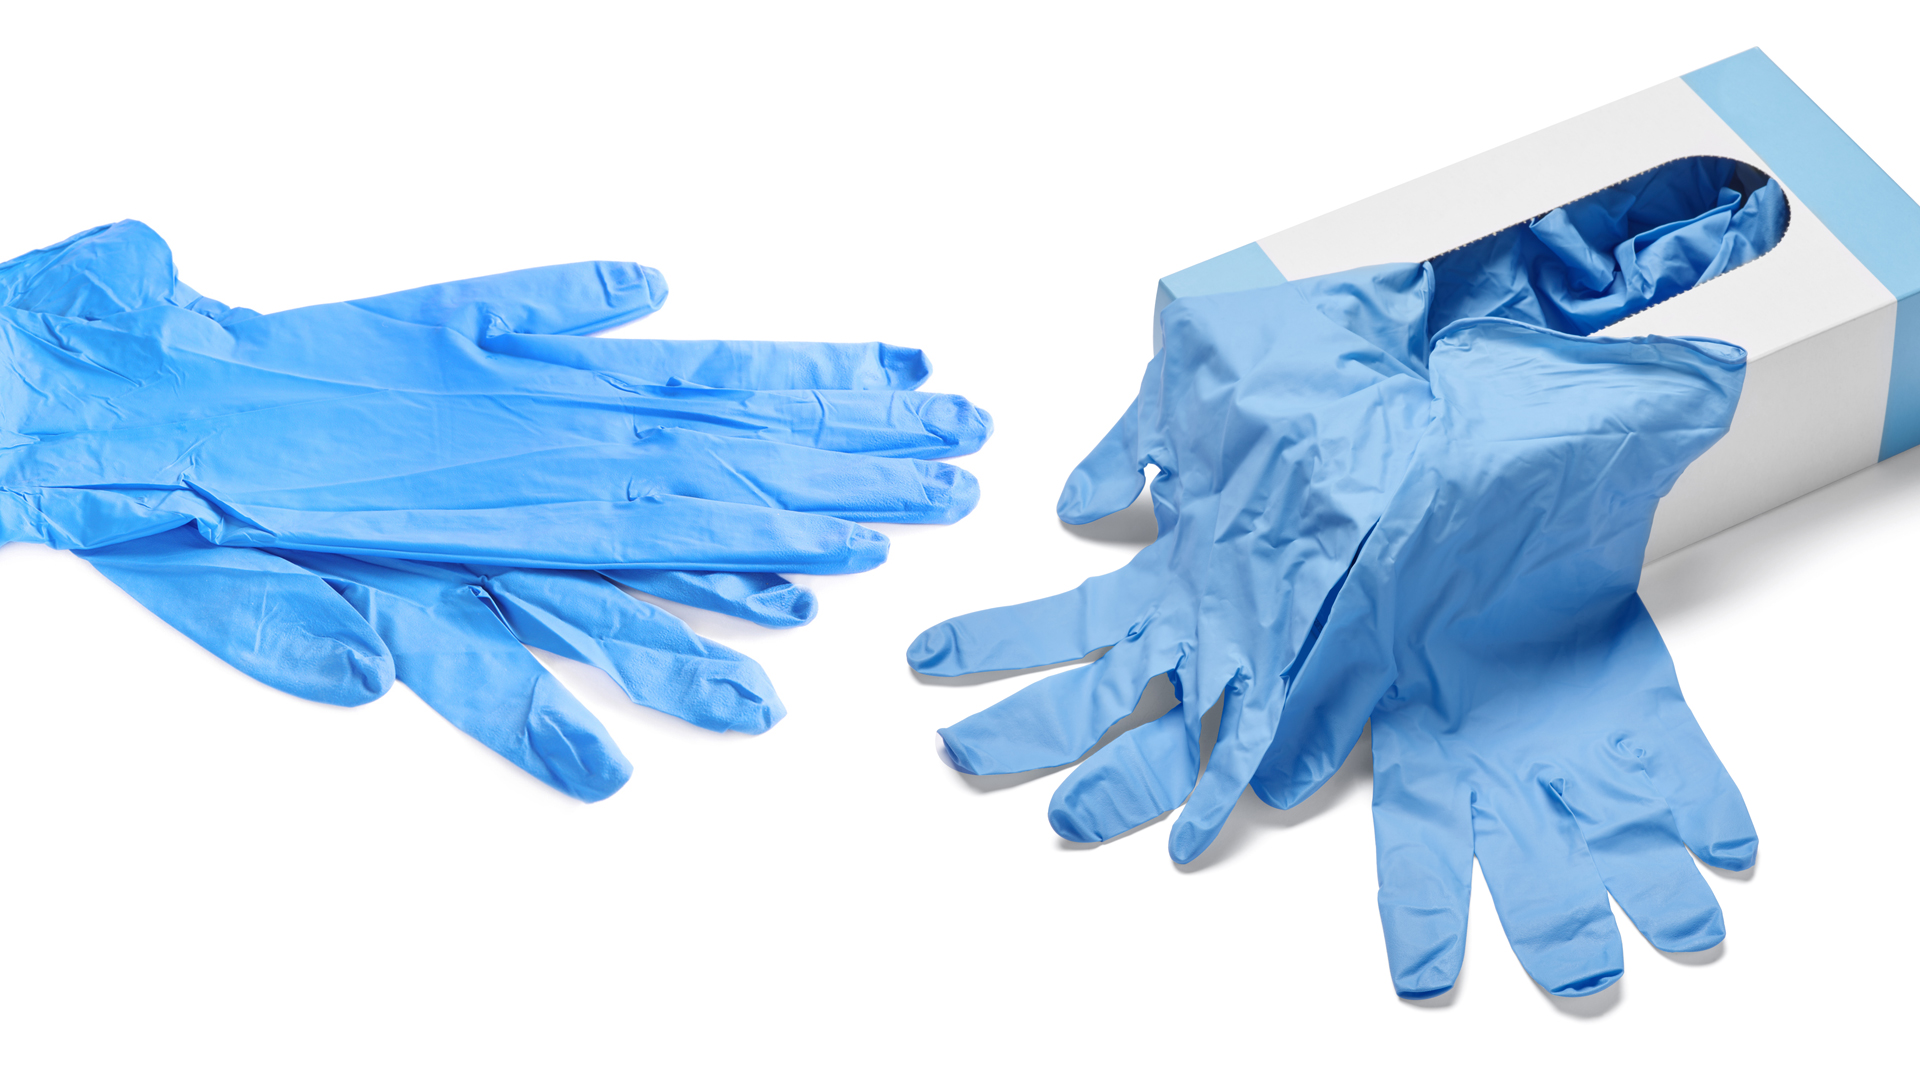 Amazon Updates US Requirements for Medical Gloves